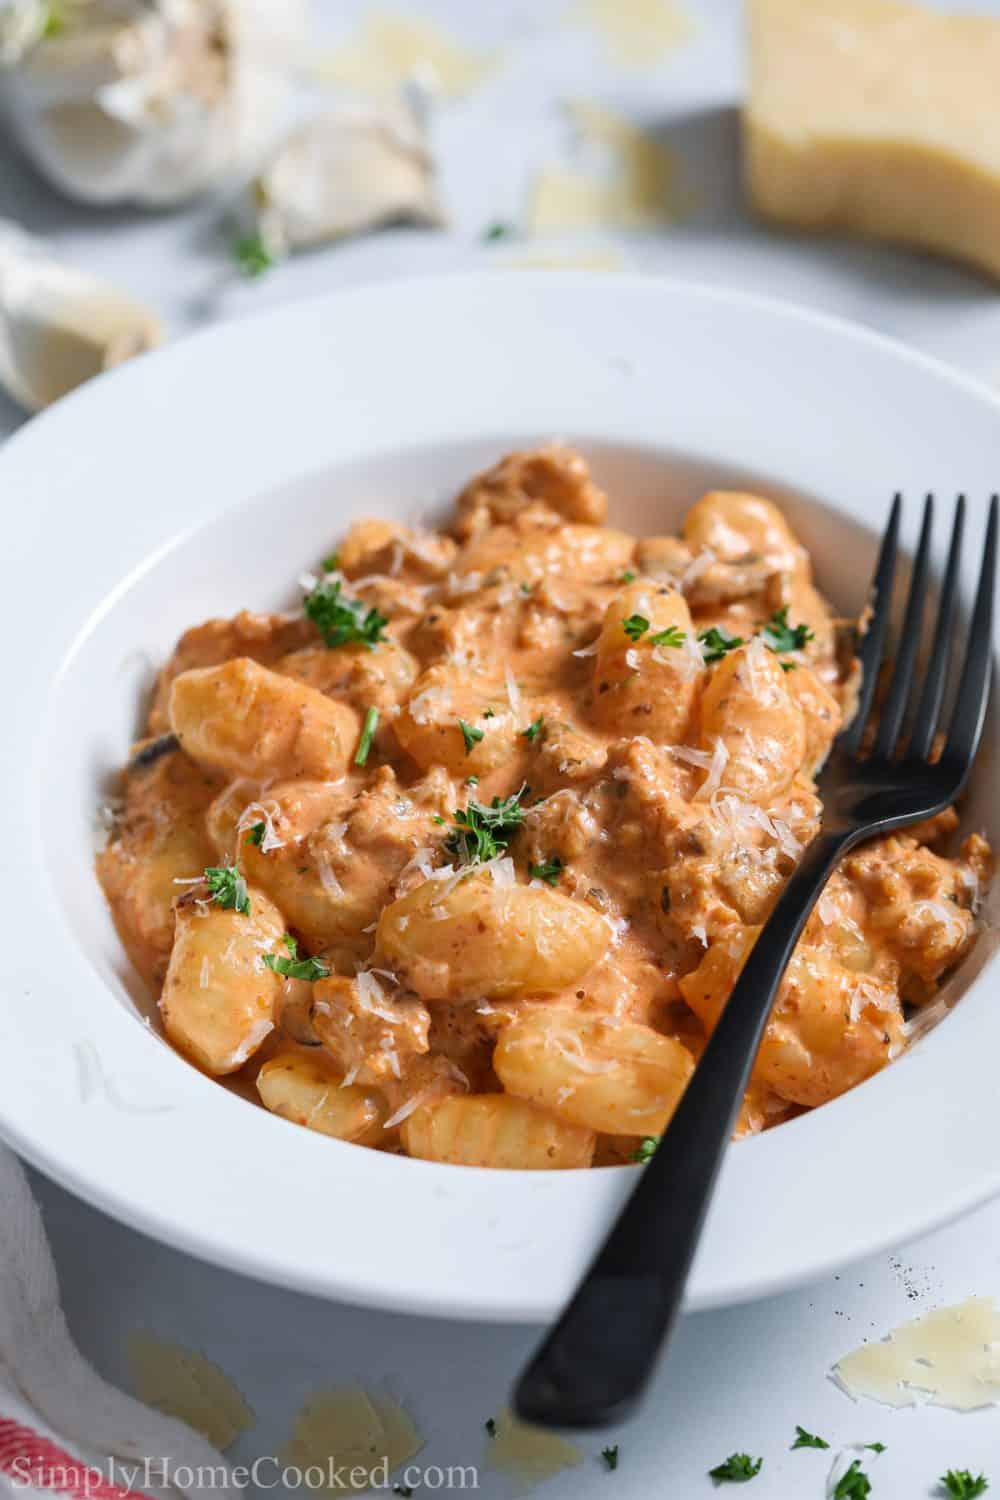 Creamy Chicken Gnocchi With Red Sauce - Simply Home Cooked